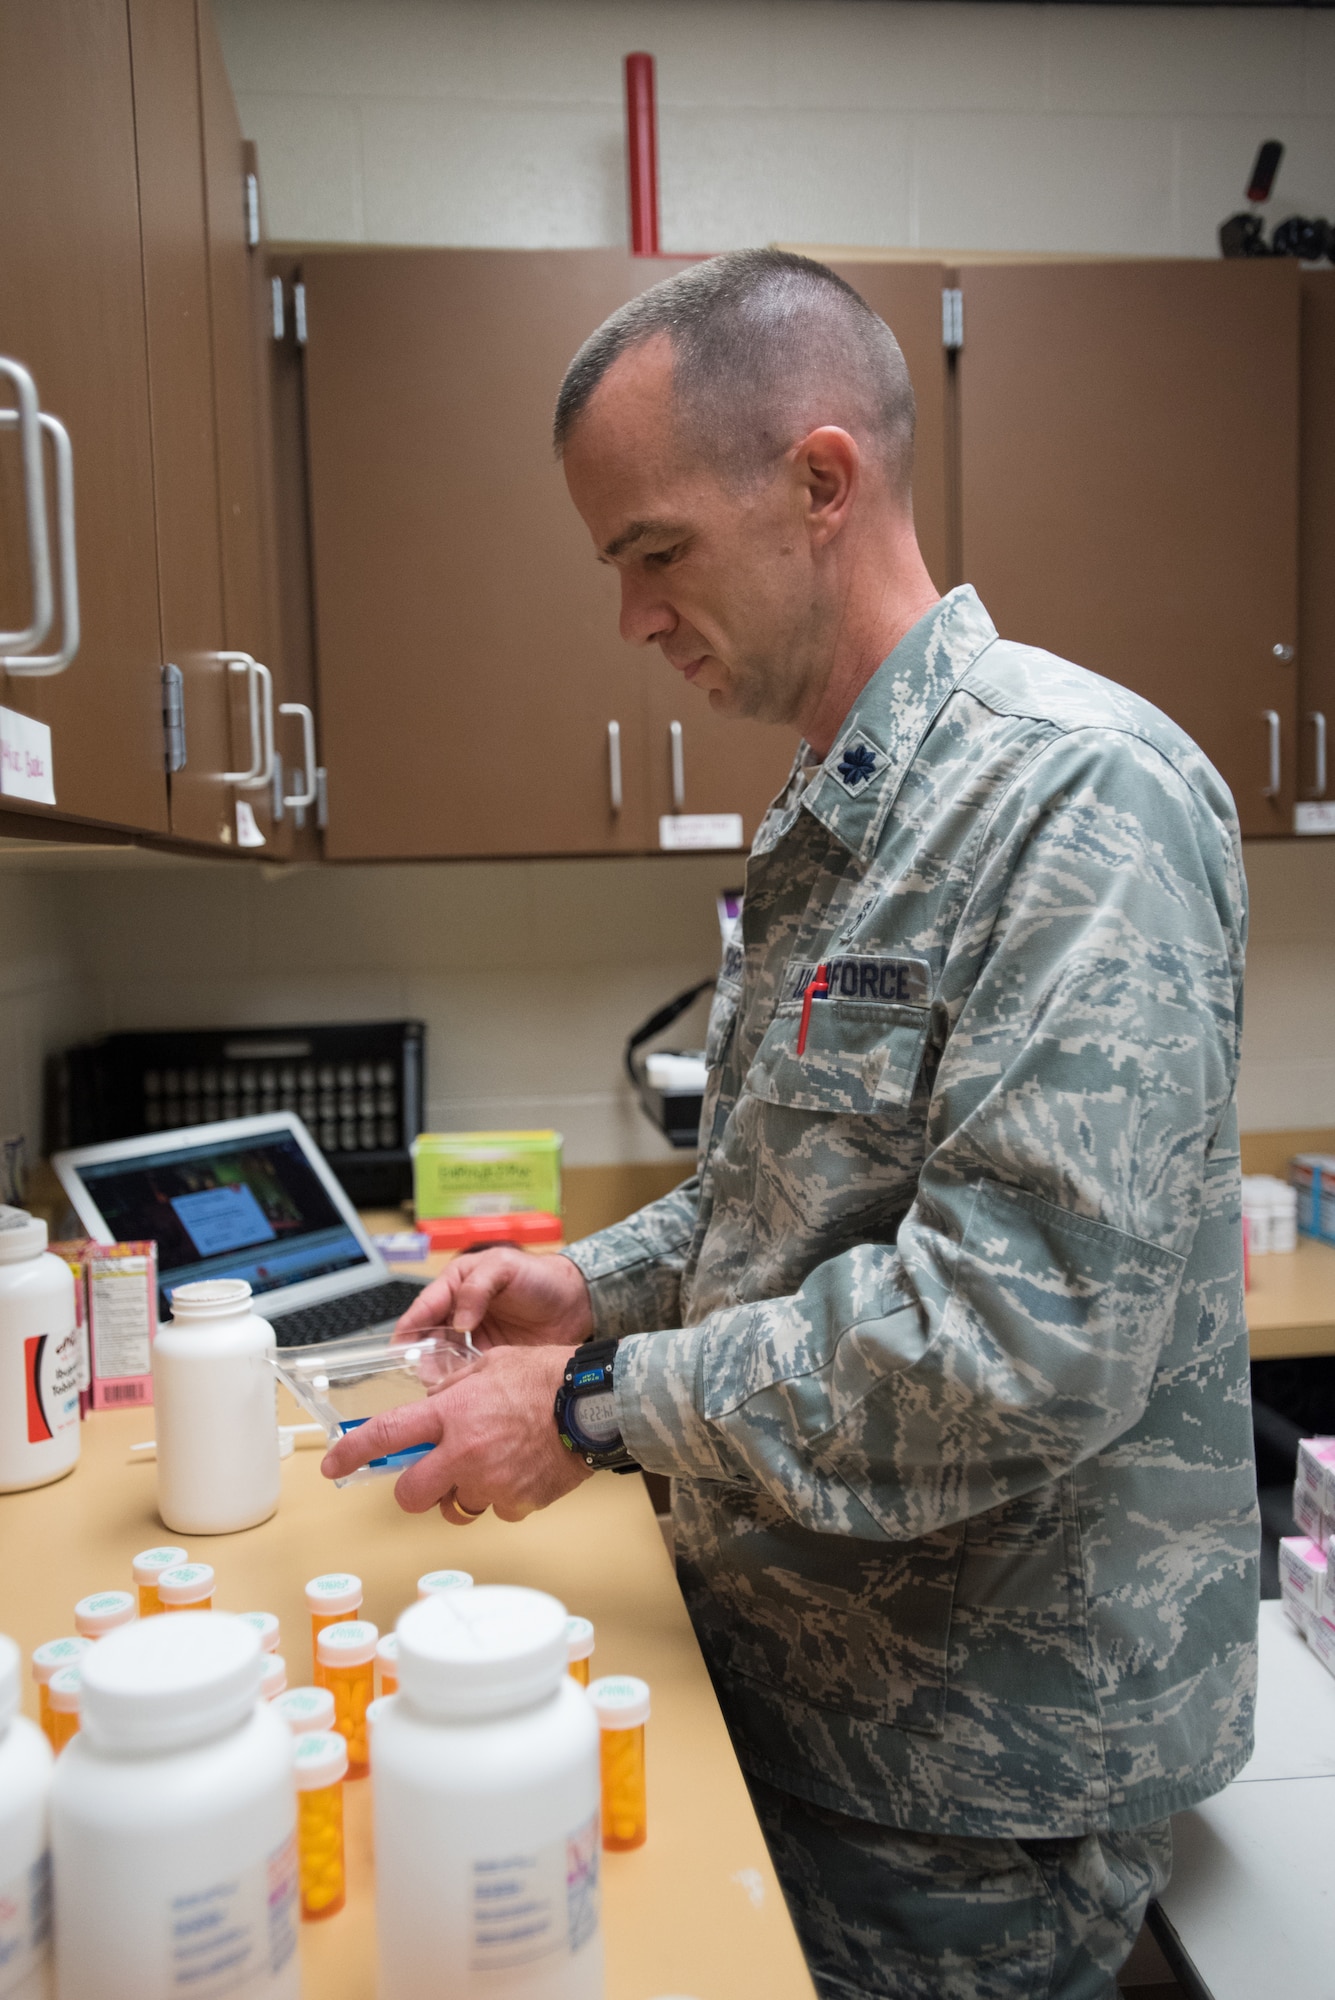 Lt. Col. Michael Cartwright, a pharmacist for Detachment 1 187th Medical Group, Alabama Air National Guard, counts medications at at Carlisle County High School in Bardwell, Ky., July 17, 2016, in preparation for Bluegrass Medical Innovative Readiness Training. The program will offer medical and dental care at no cost to residents in three Western Kentucky locations from July 18 to 27.(U.S. Air National Guard photo by Master Sgt. Phil Speck)